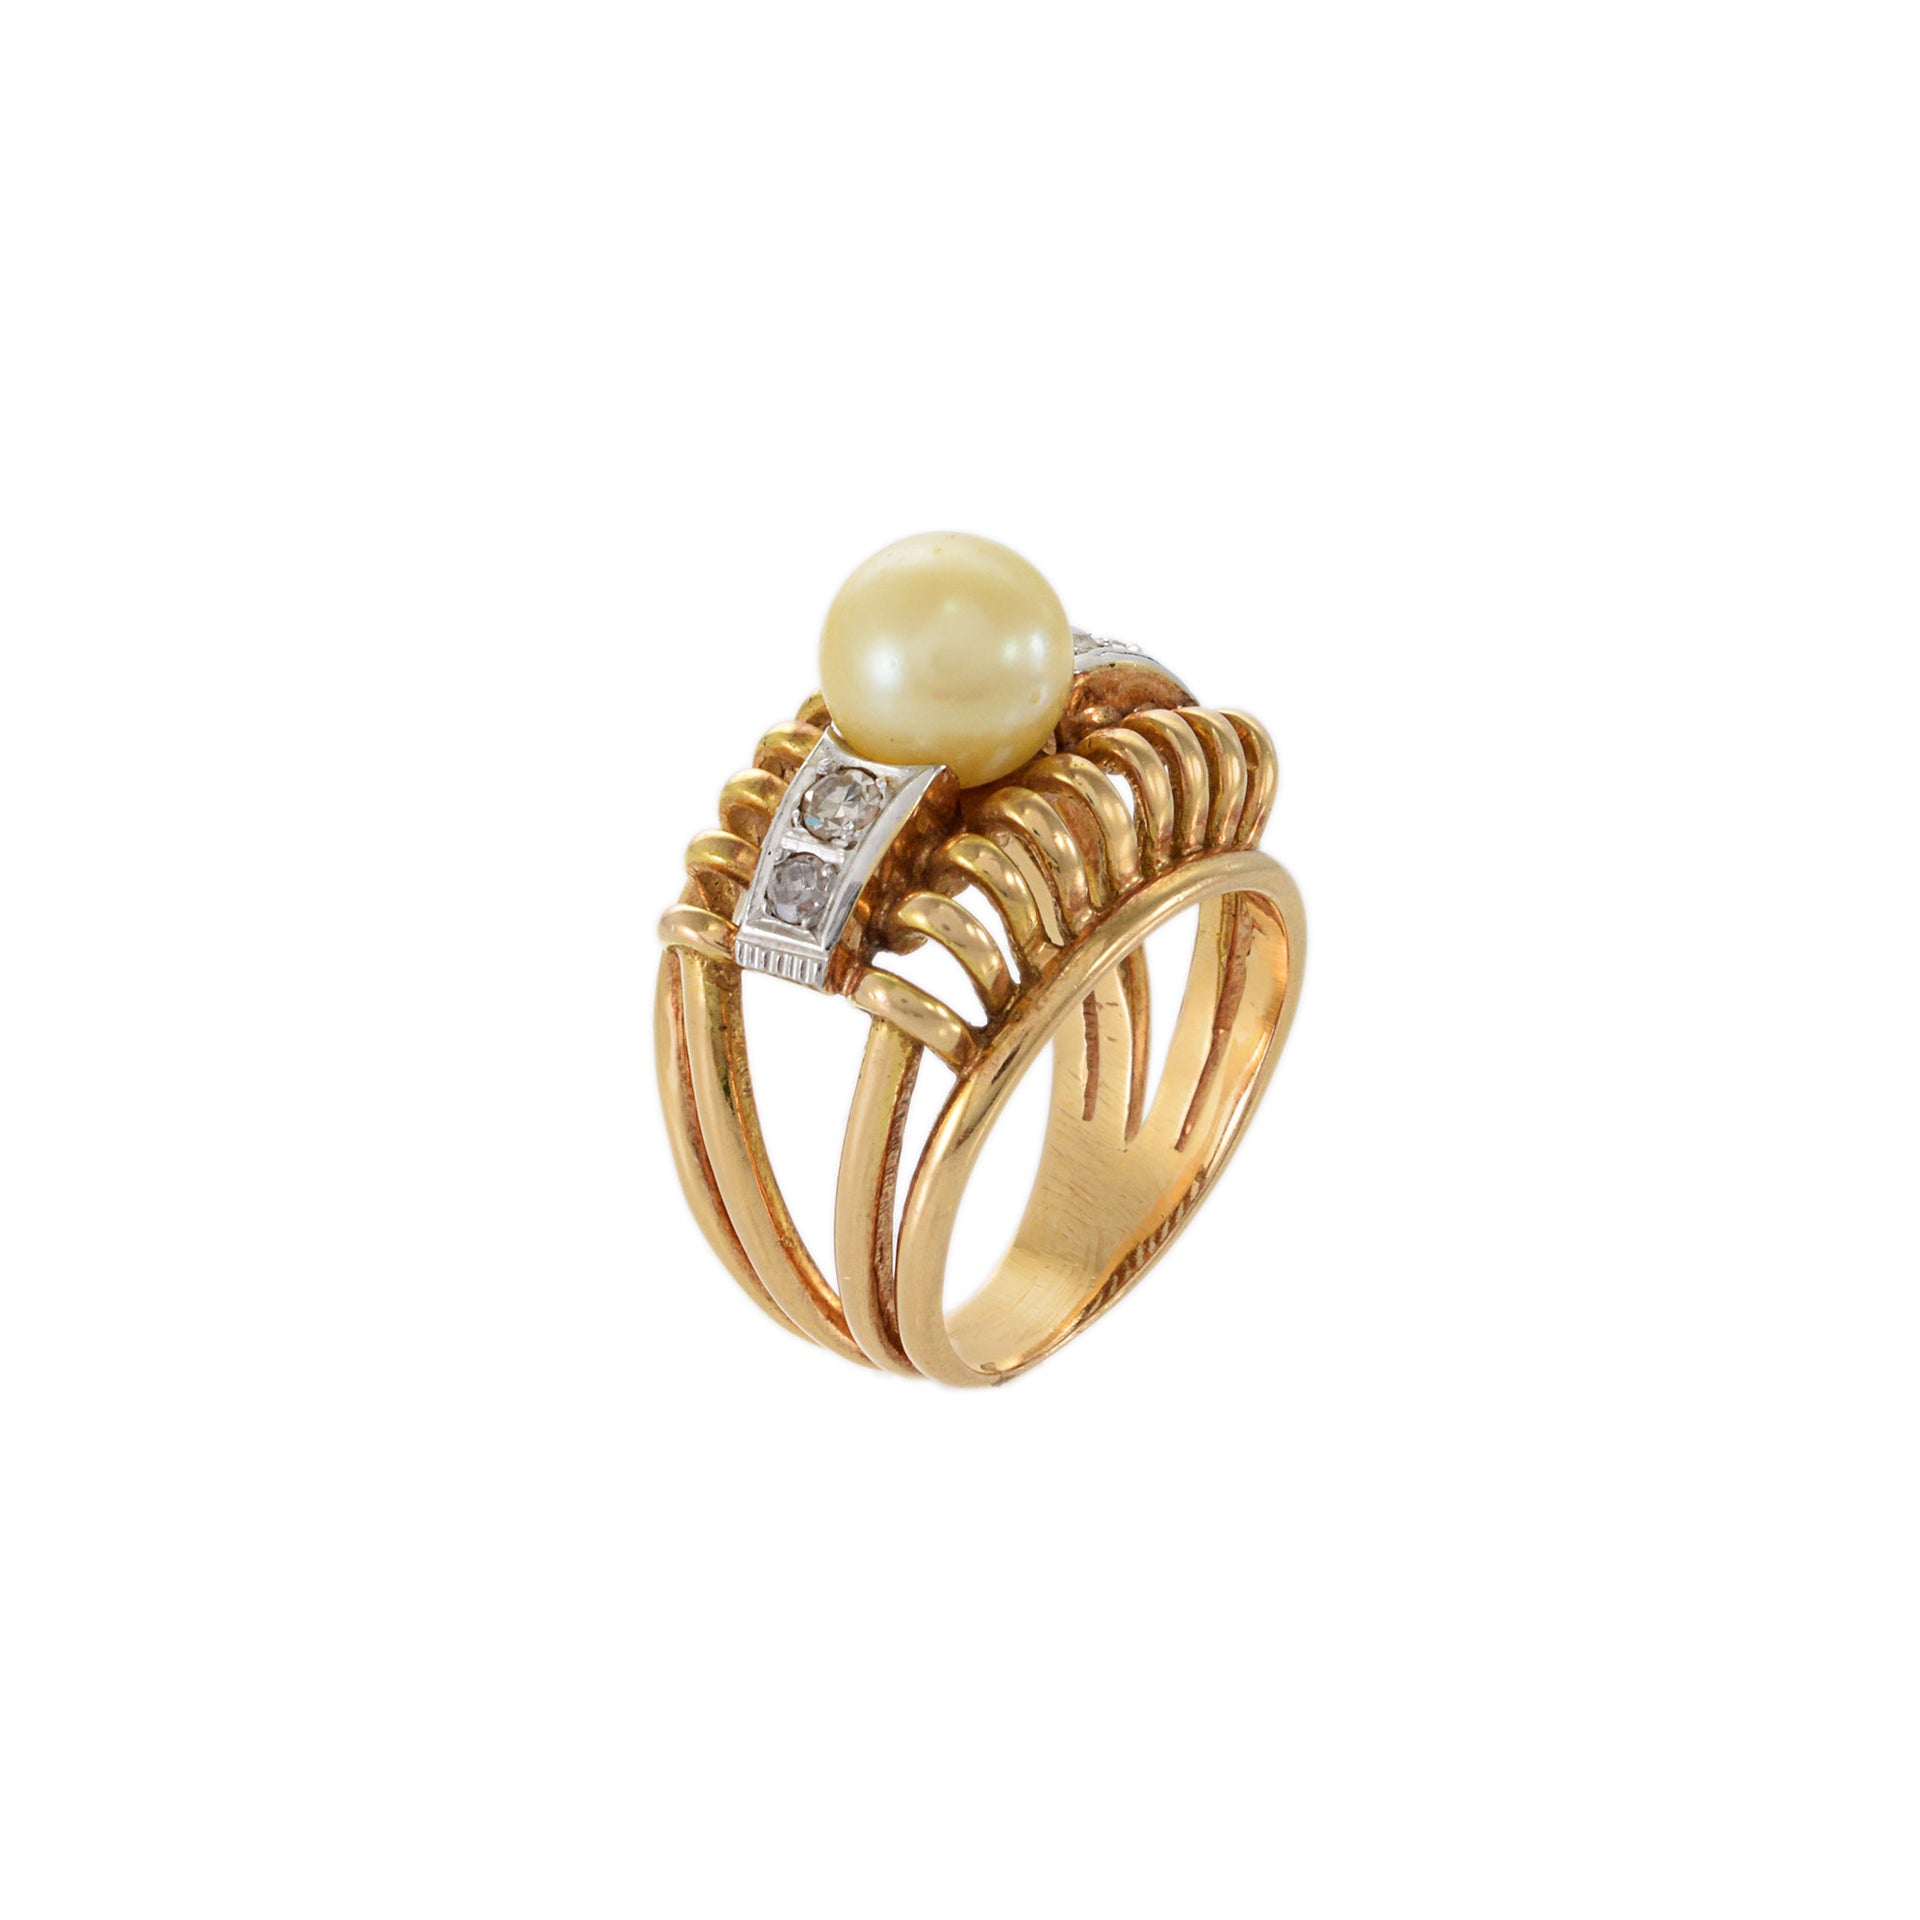 Vintage Antique Victorian Era 18KT Yellow Gold And Platinum Pearl Diamond Ring